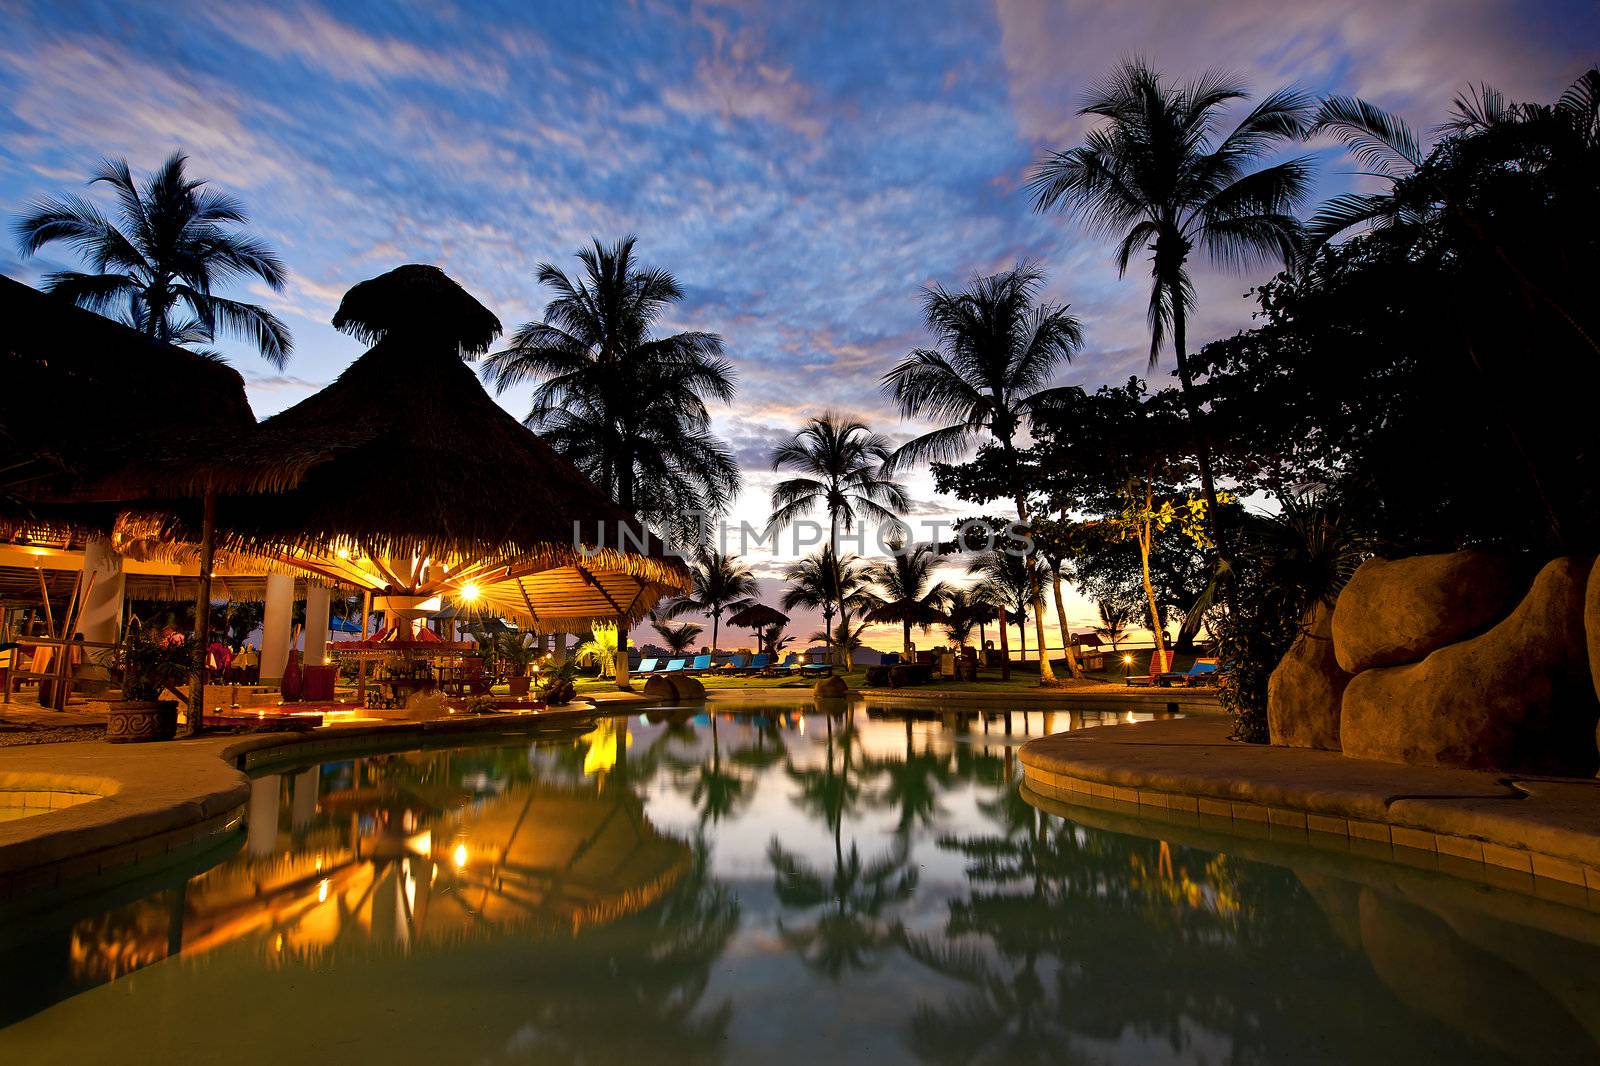 Evening picture of the swimming pool area on a resort